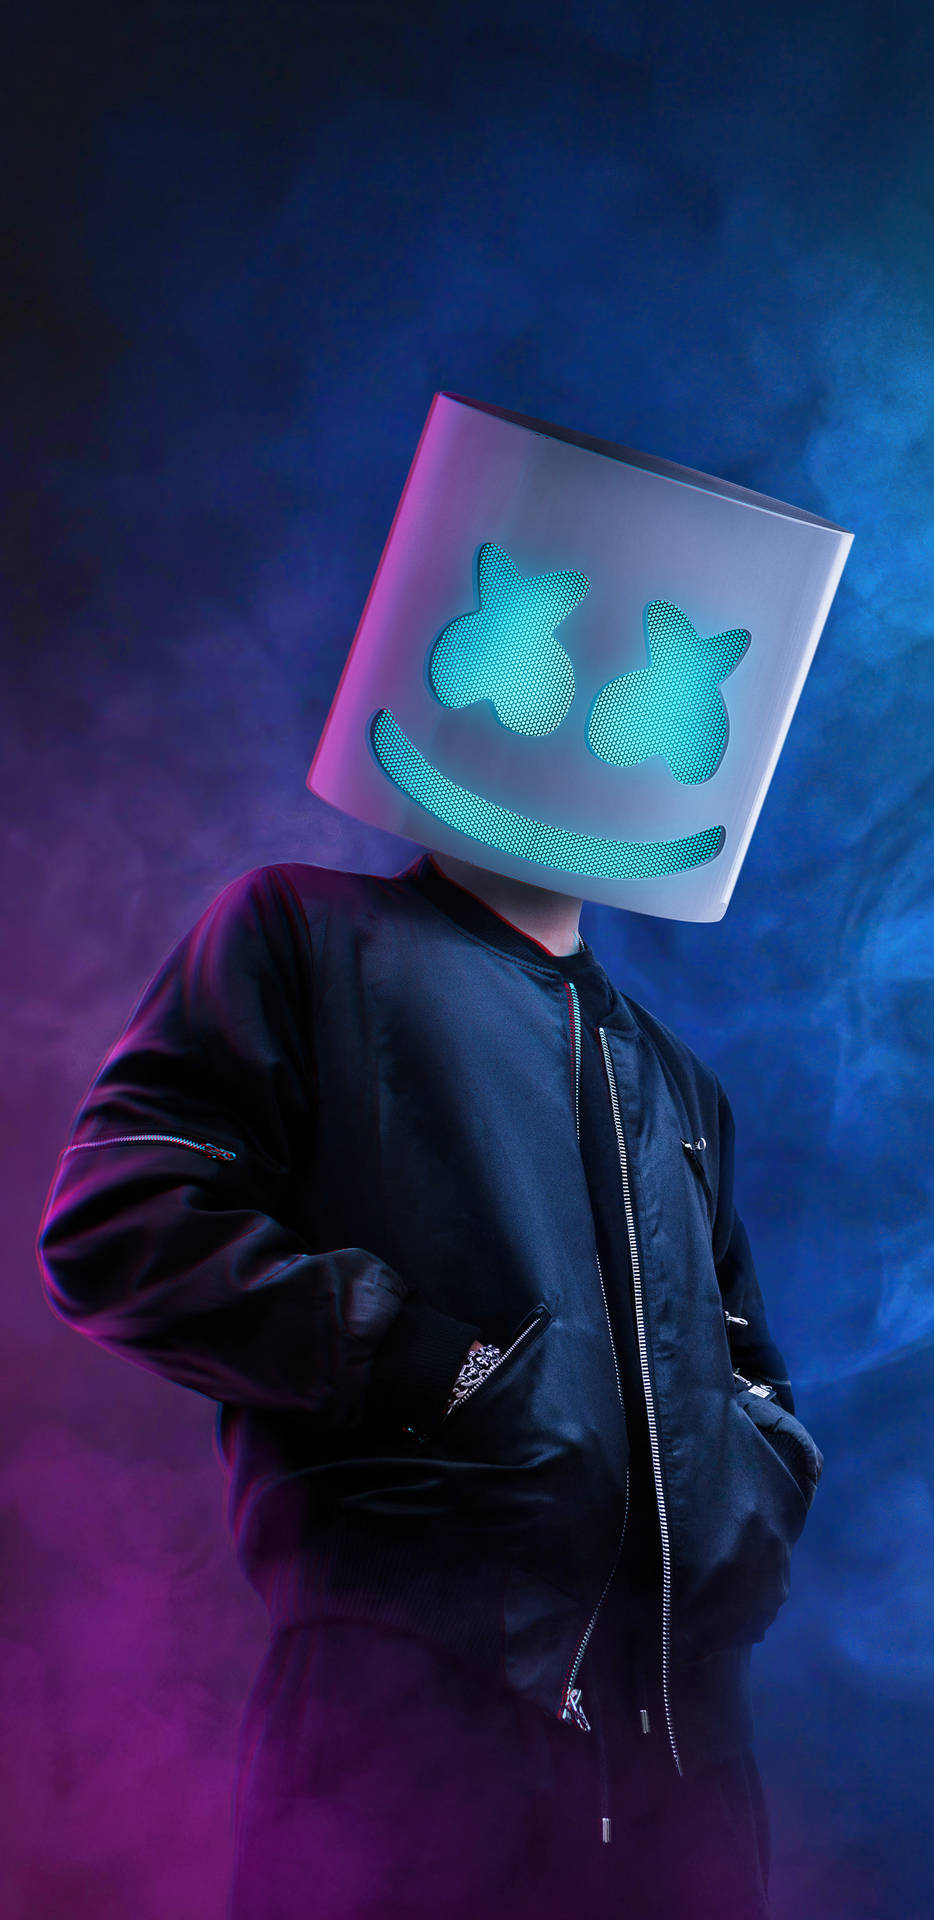 Download Blue Background Marshmello Hd Iphone Wallpaper ...